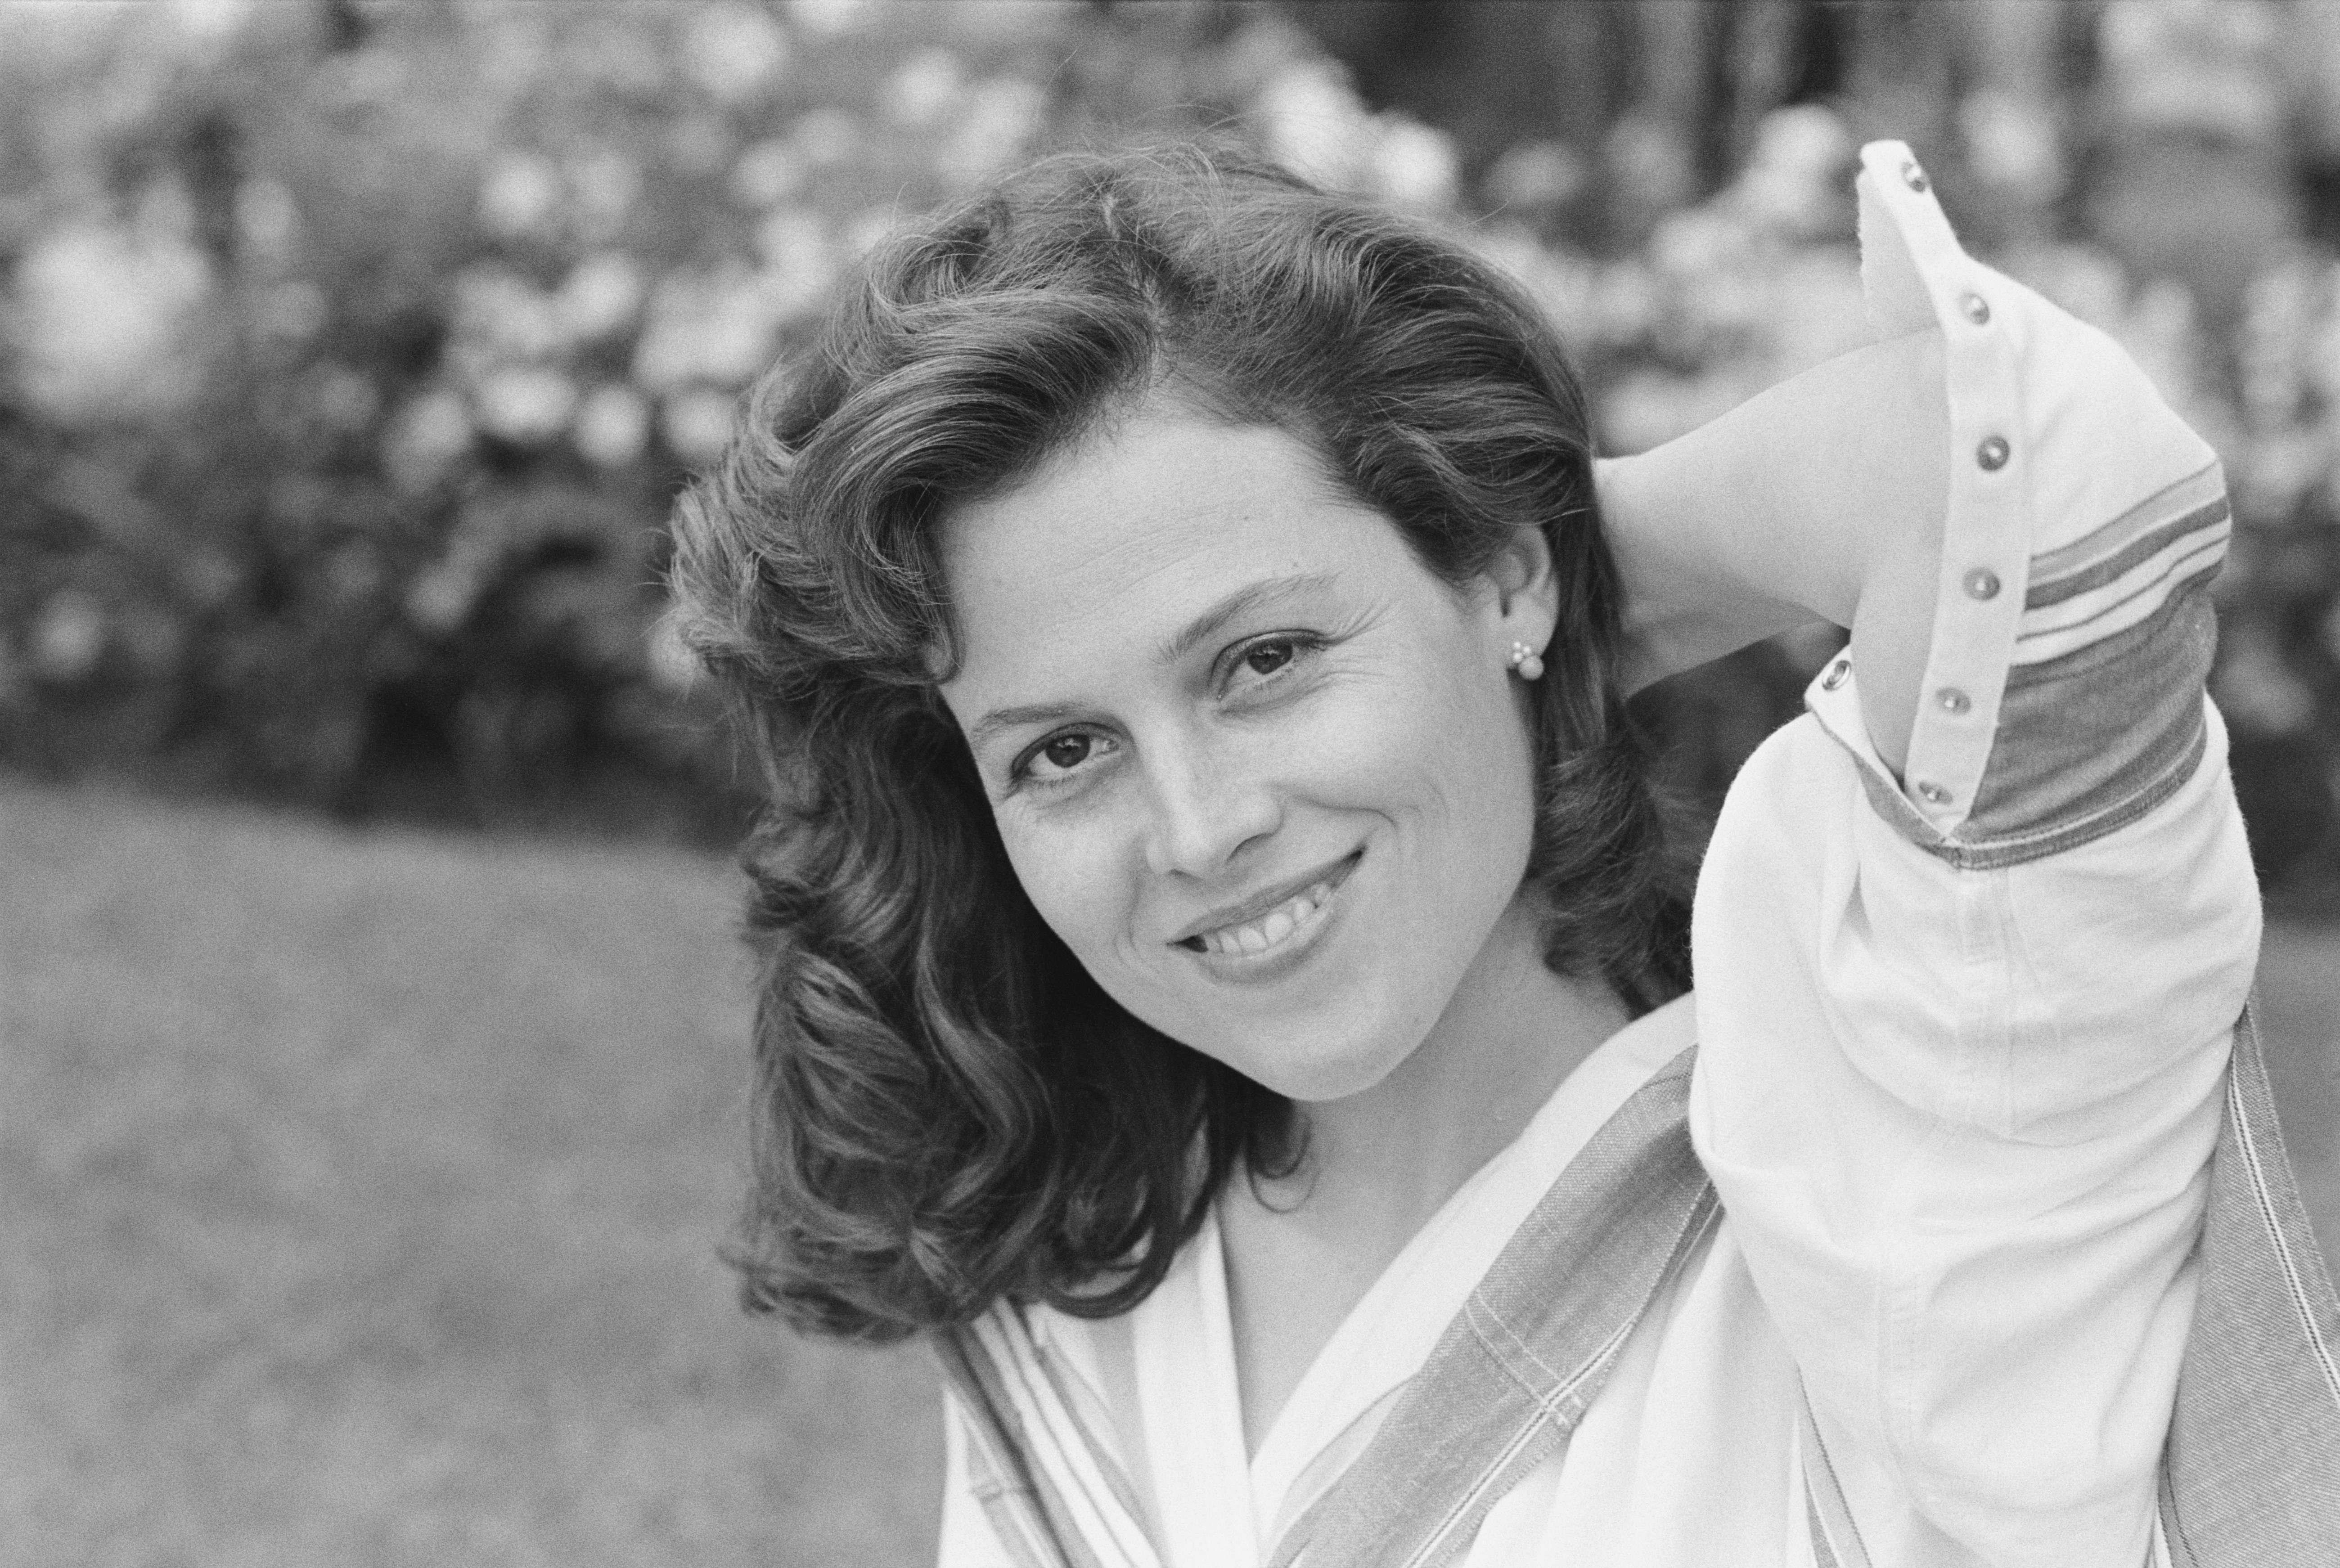 Sigourney Weaver as Jill Bryant in "The Year of Living Dangerously," in London on May 22, 1983 | Source: Getty Images